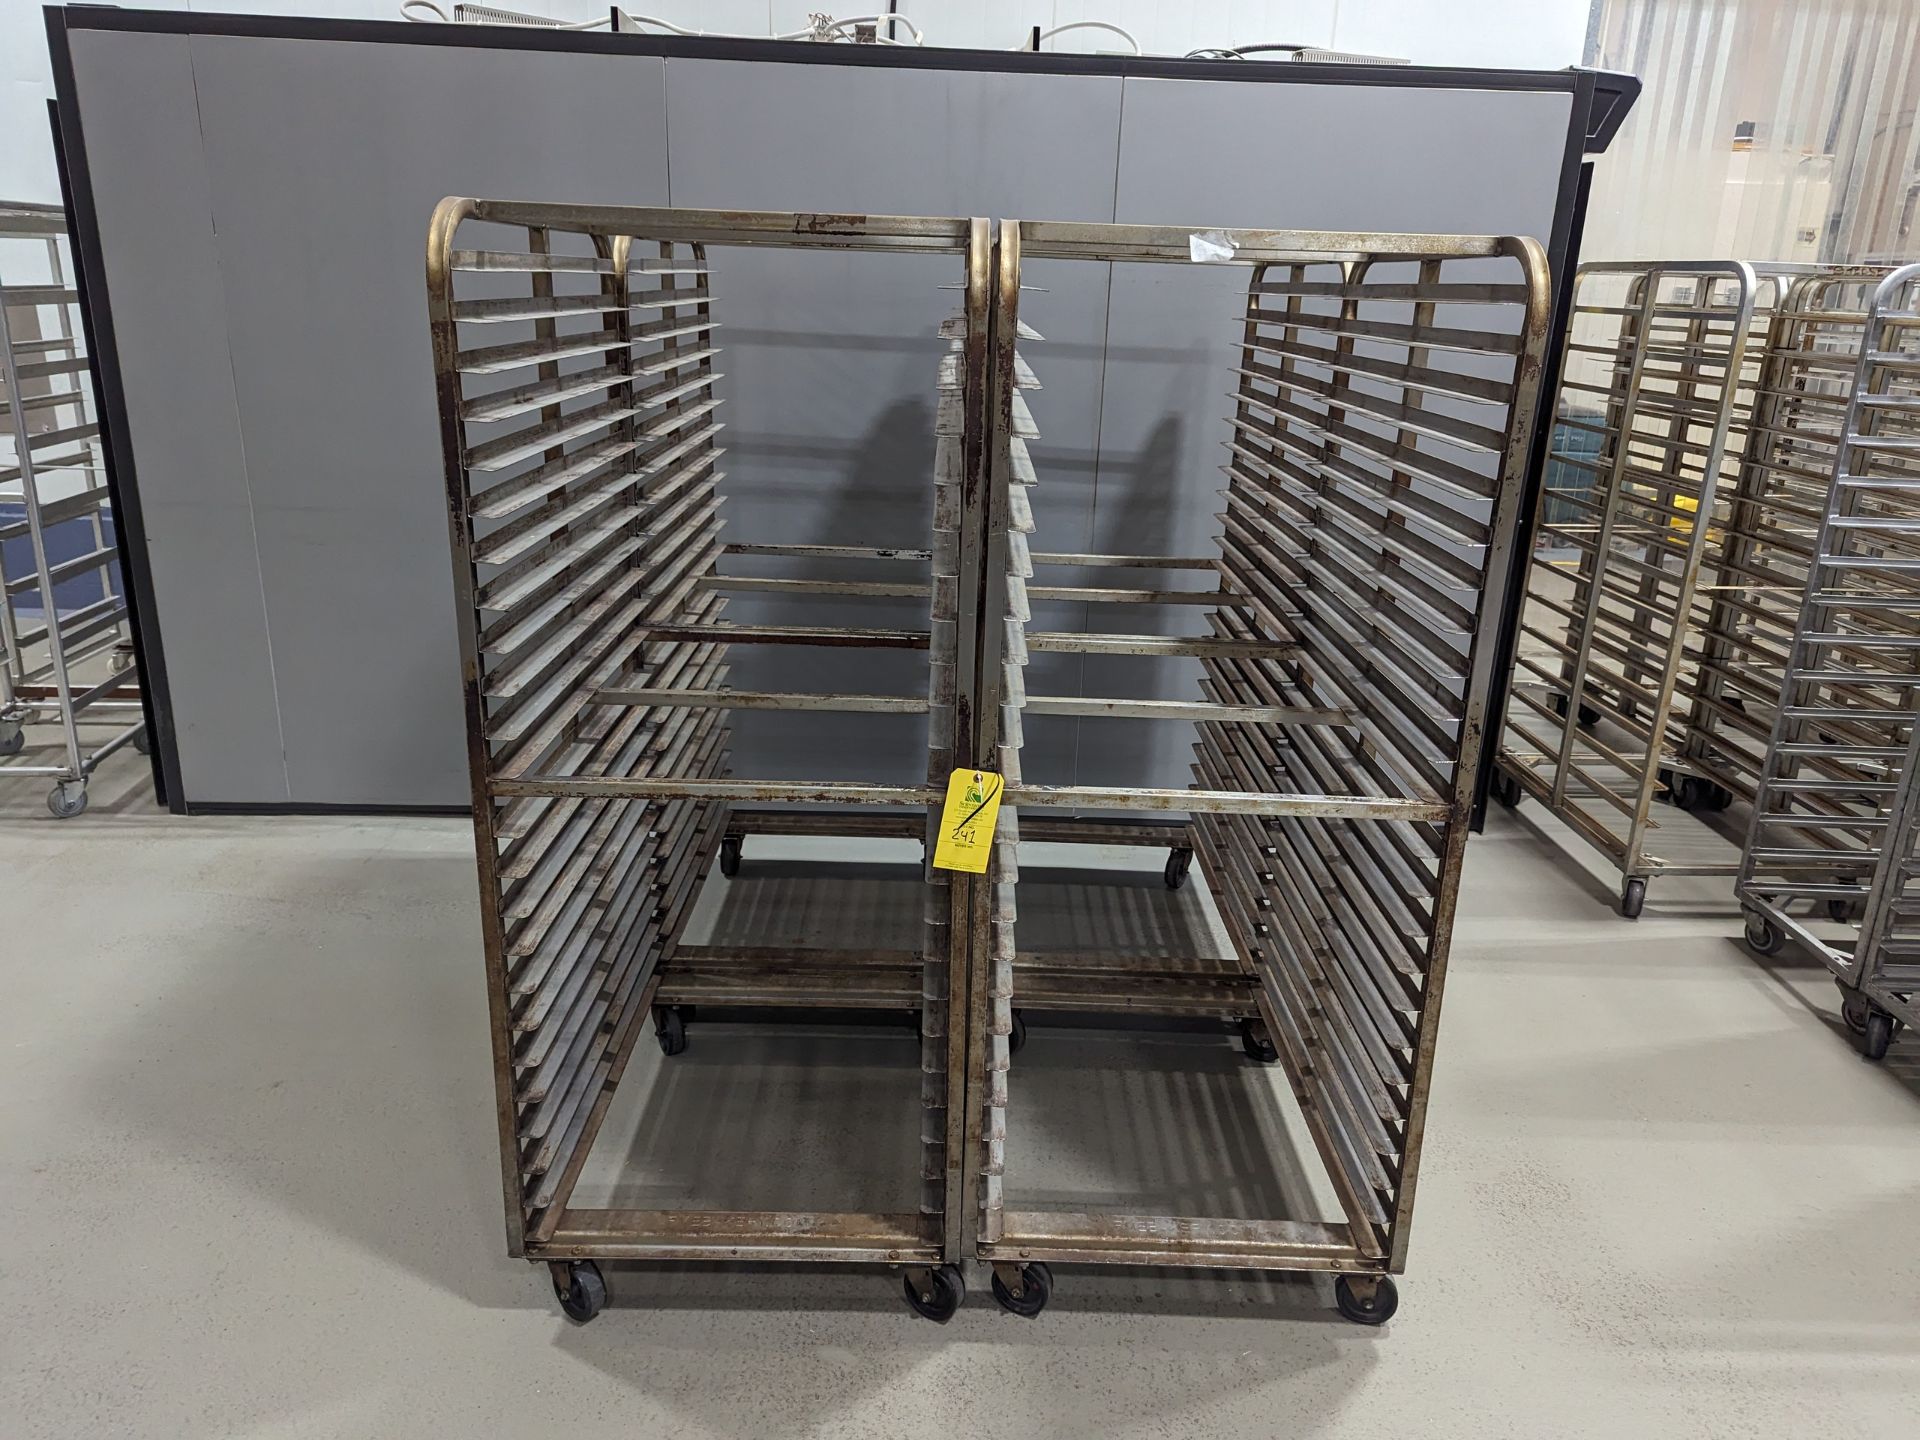 Lot of 4 Double Wide Stainless Steel Bakery Racks, Dimensions LxWxH: 72x57x69 Measurements are for l